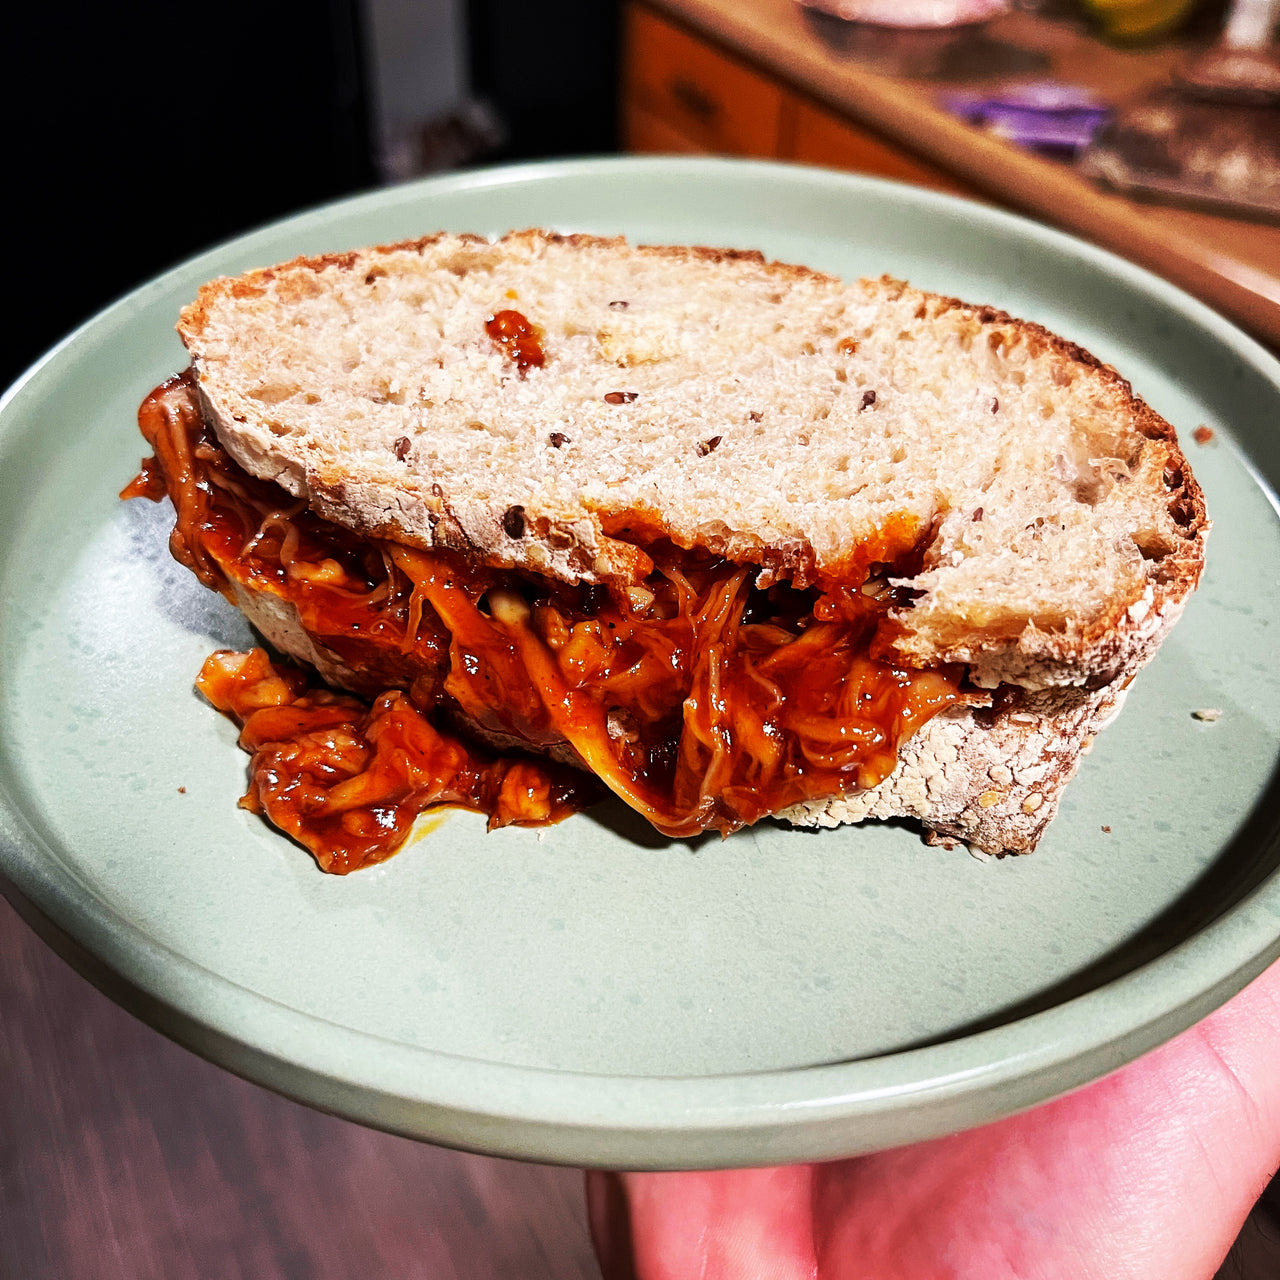 Vegan Pulled Pork Sandwiches with Local Ingredients